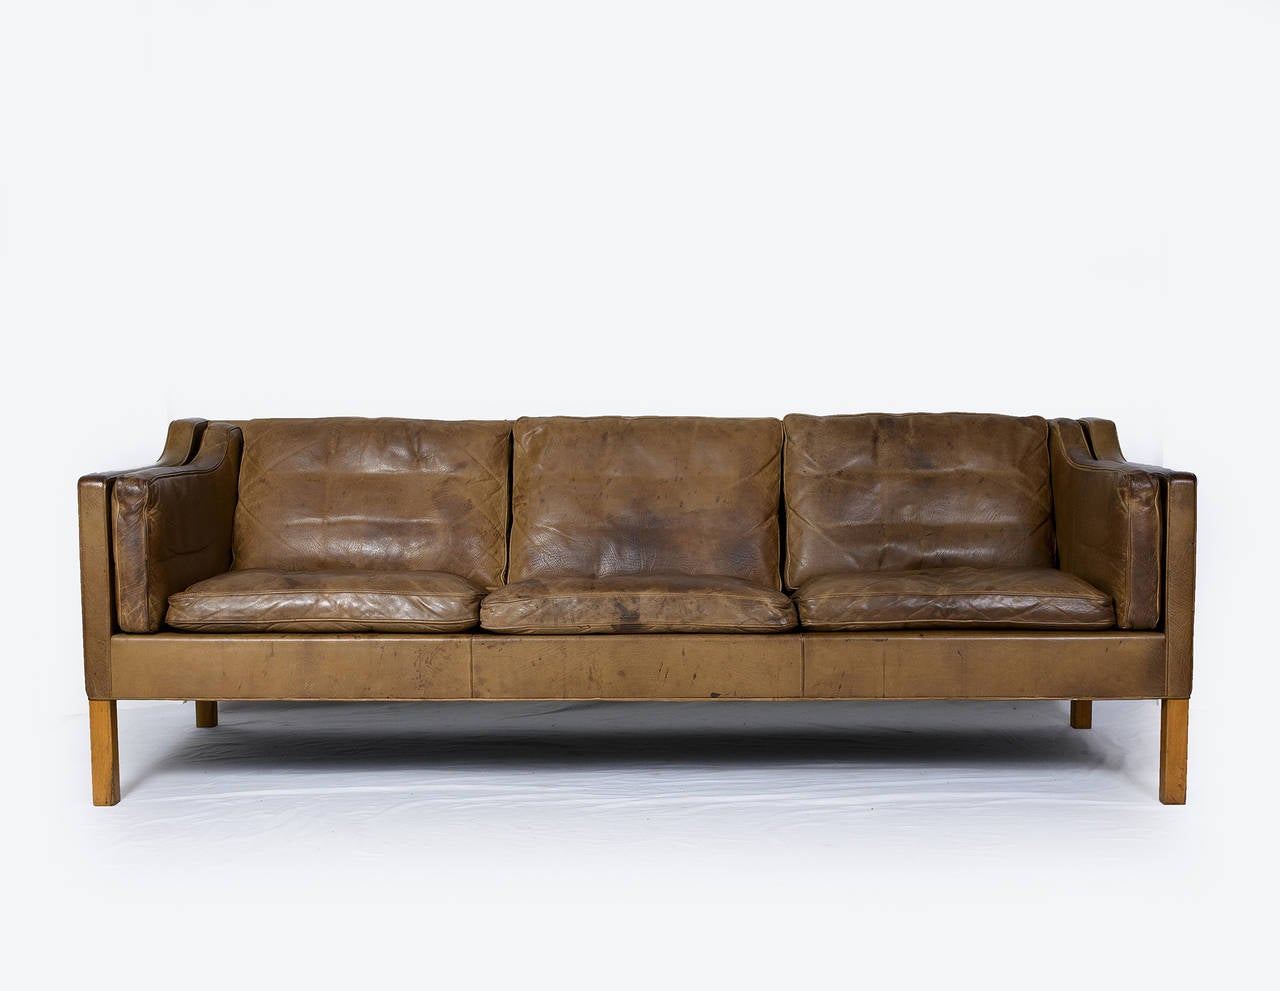 Borge Mogensen model #2213 three-seat sofa designed in 1962 and produced by Fredericia. Nice original leather with nice patina.  Store formerly known as ARTFUL DODGER INC